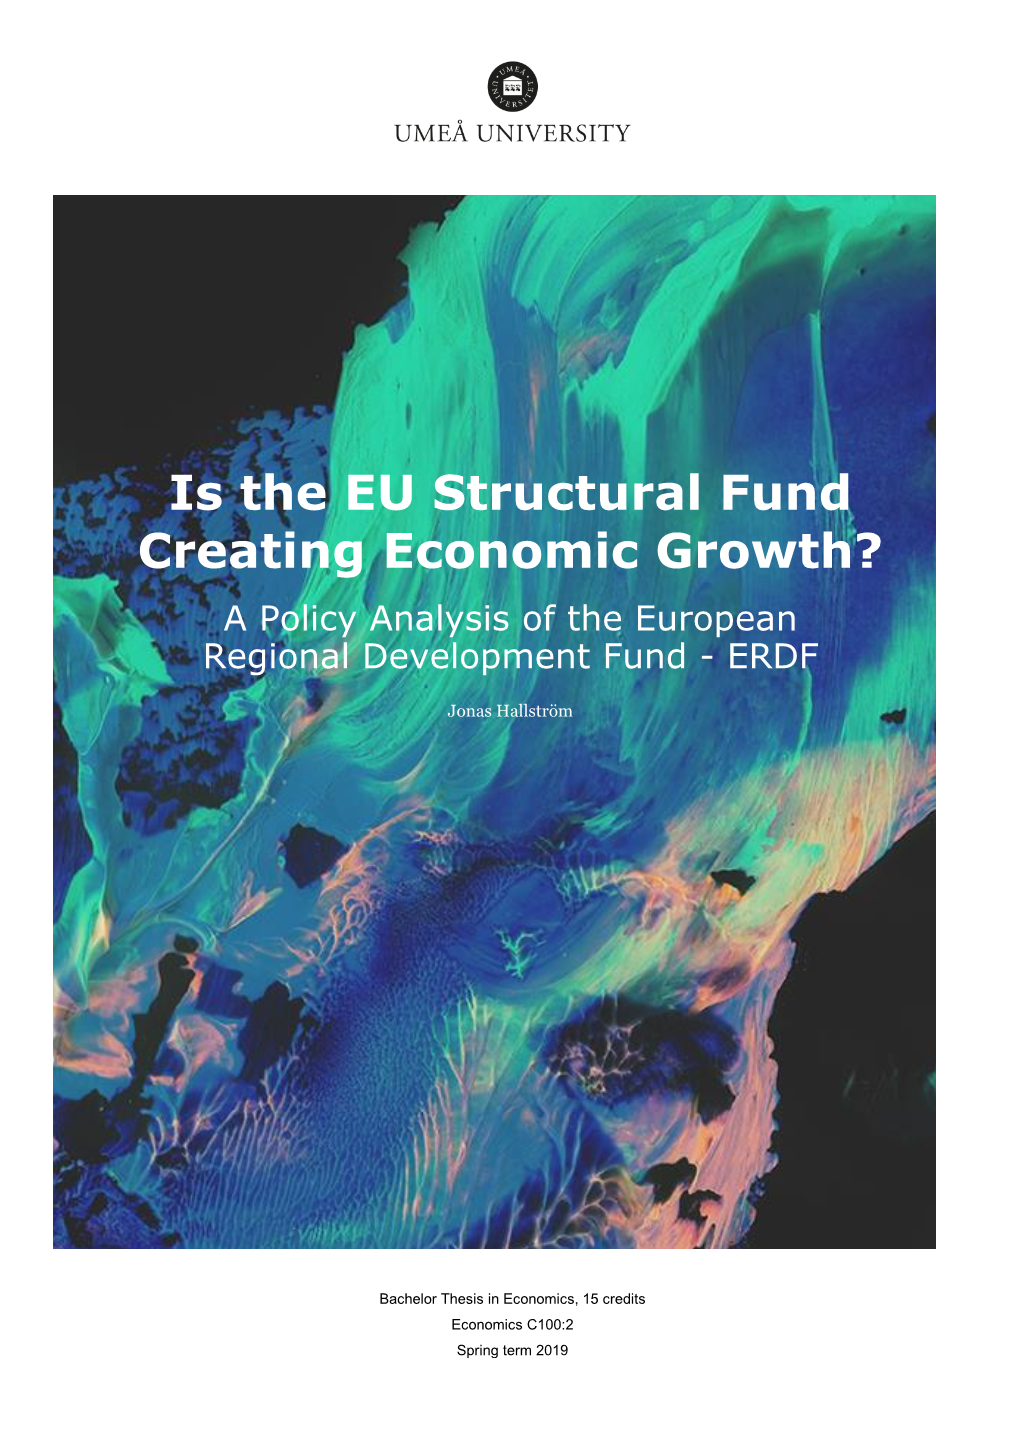 Is the EU Structural Fund Creating Economic Growth? a Policy Analysis of the European Regional Development Fund - ERDF